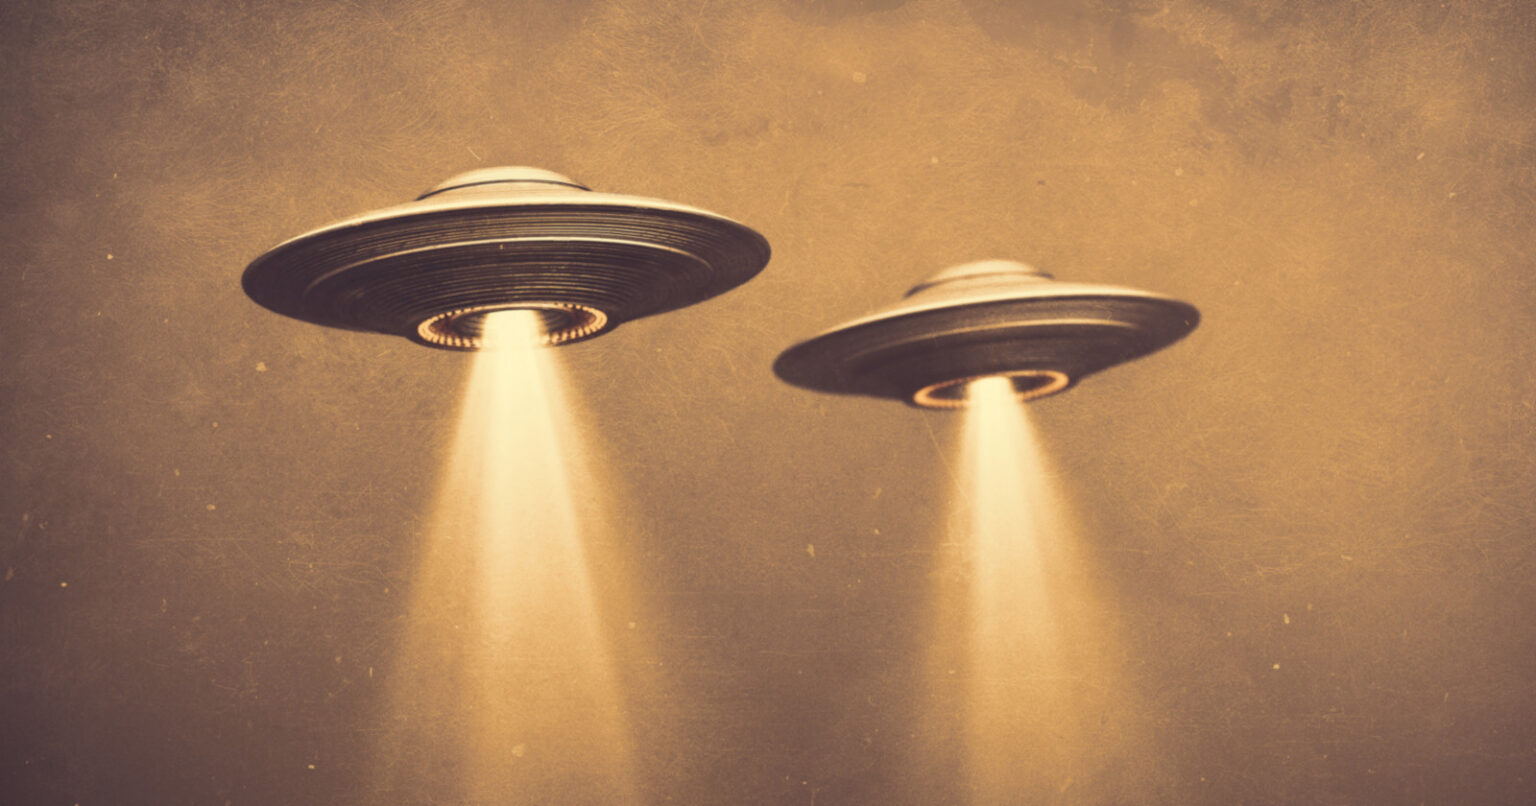 Do you believe UFOs are real or not? Well, it turns out that this conspiracy may be the only thing the left and the right can agree on. Find out why here.